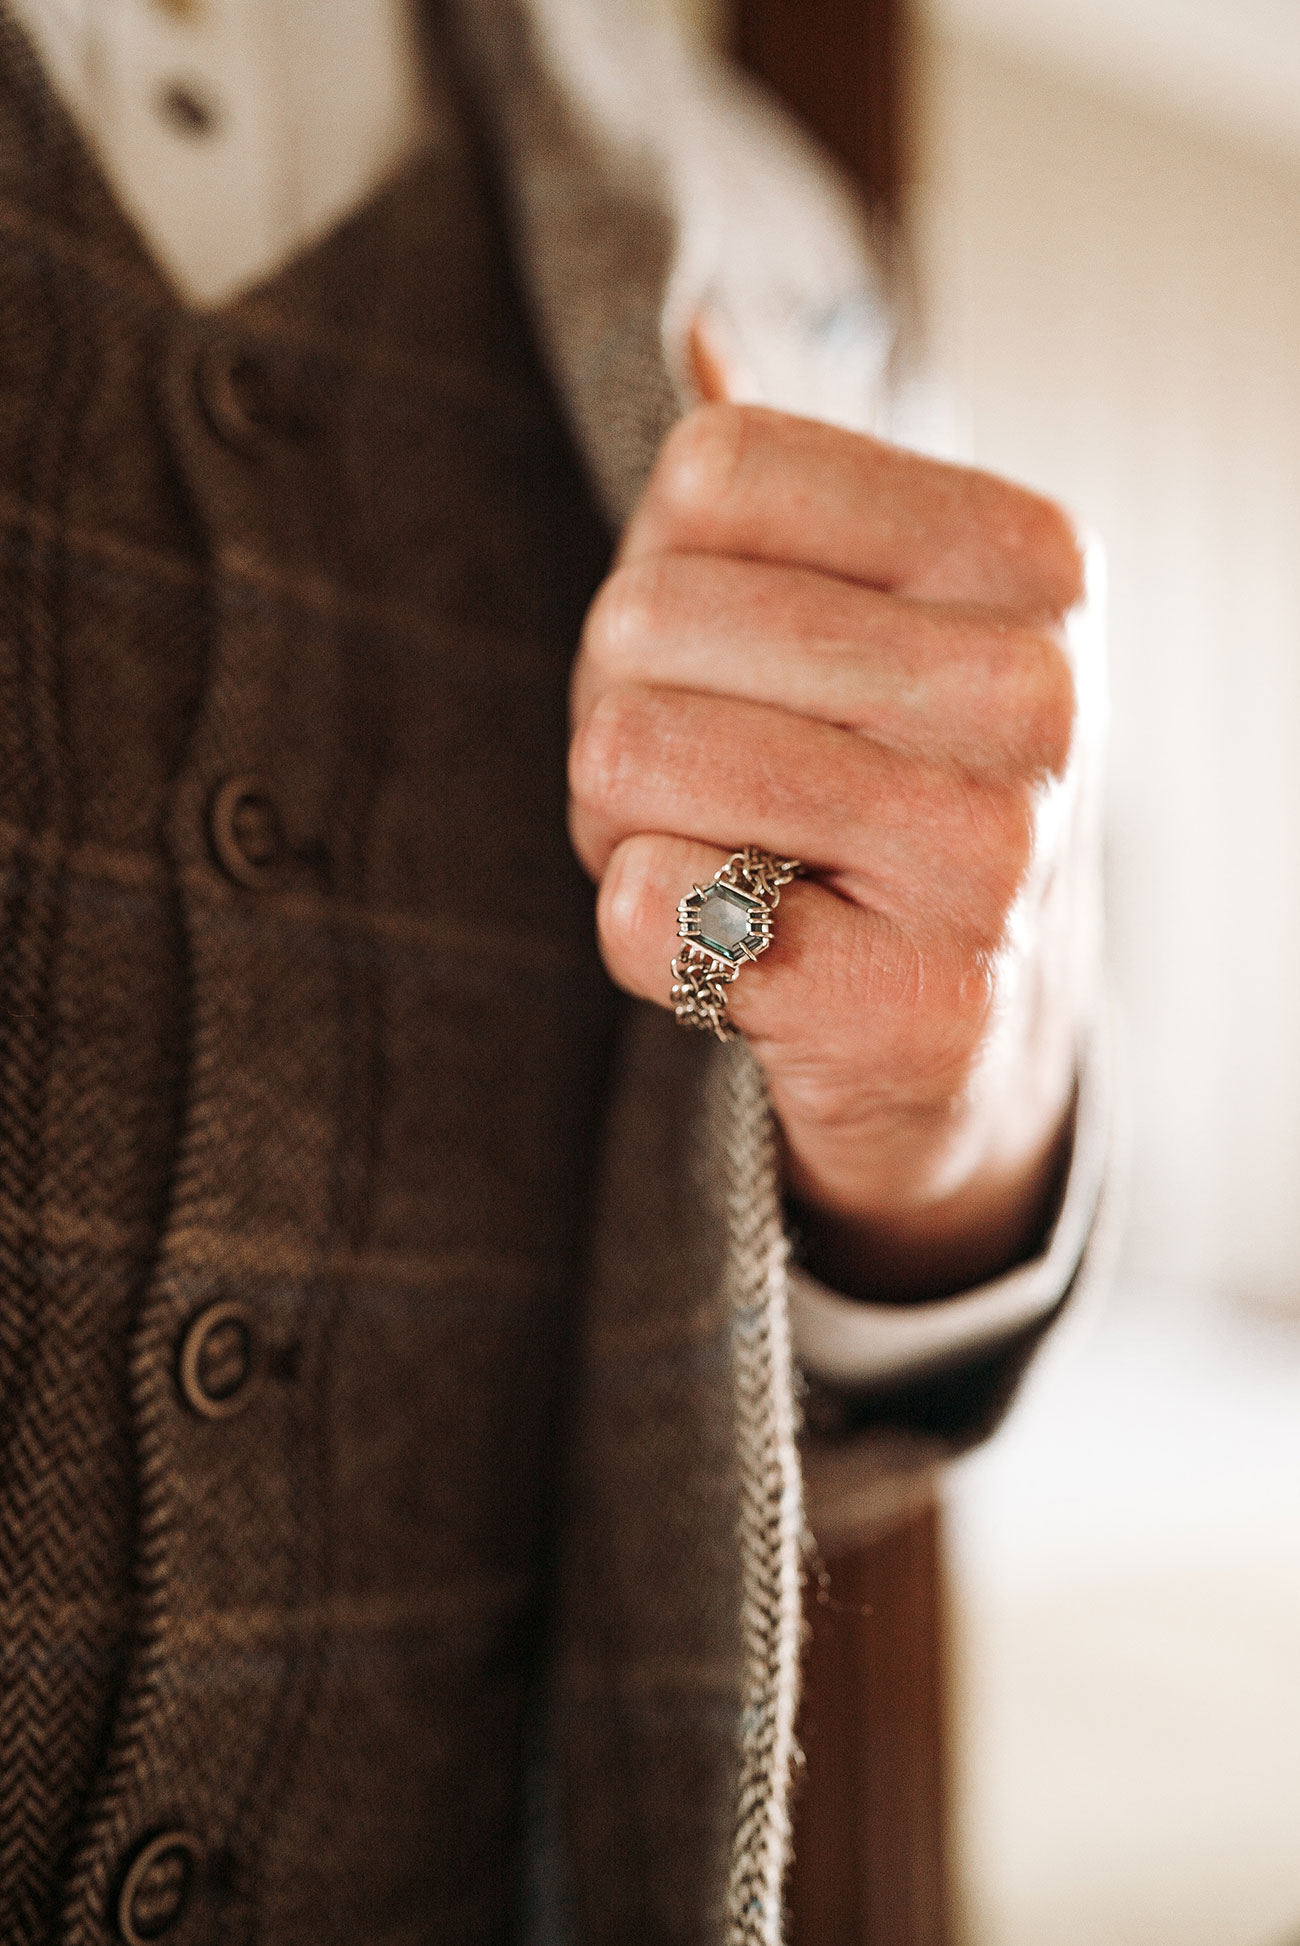 Groom showing his wedding ring